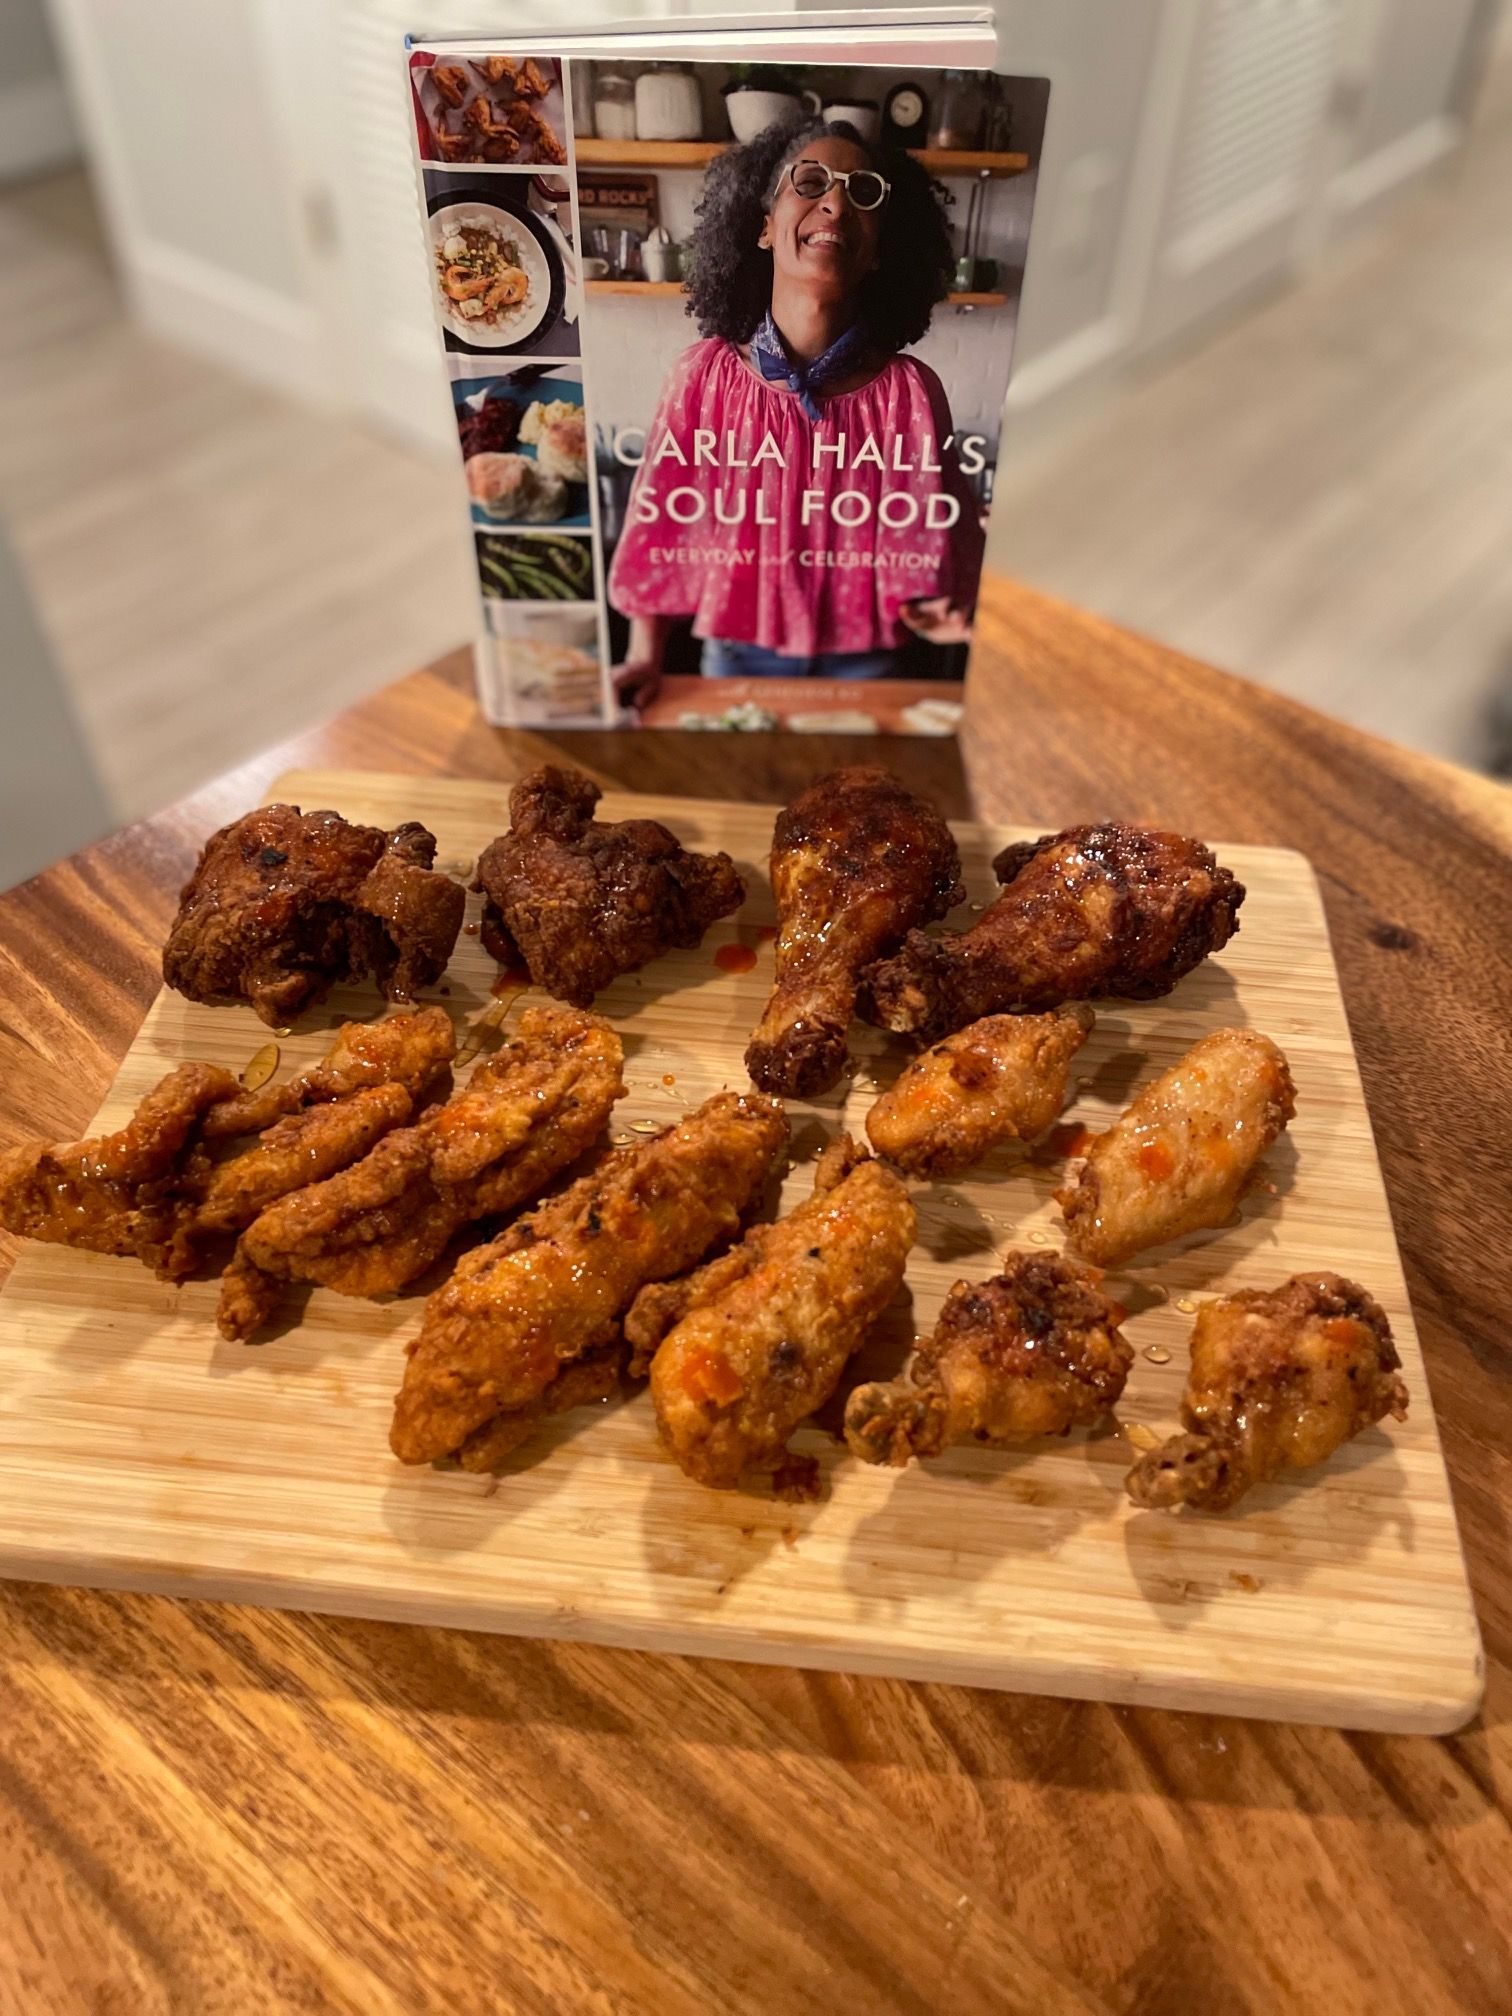 Various fried chicken pieces sit on a wooden cutting board in front of the cookbook Carla Hall's Soul Food